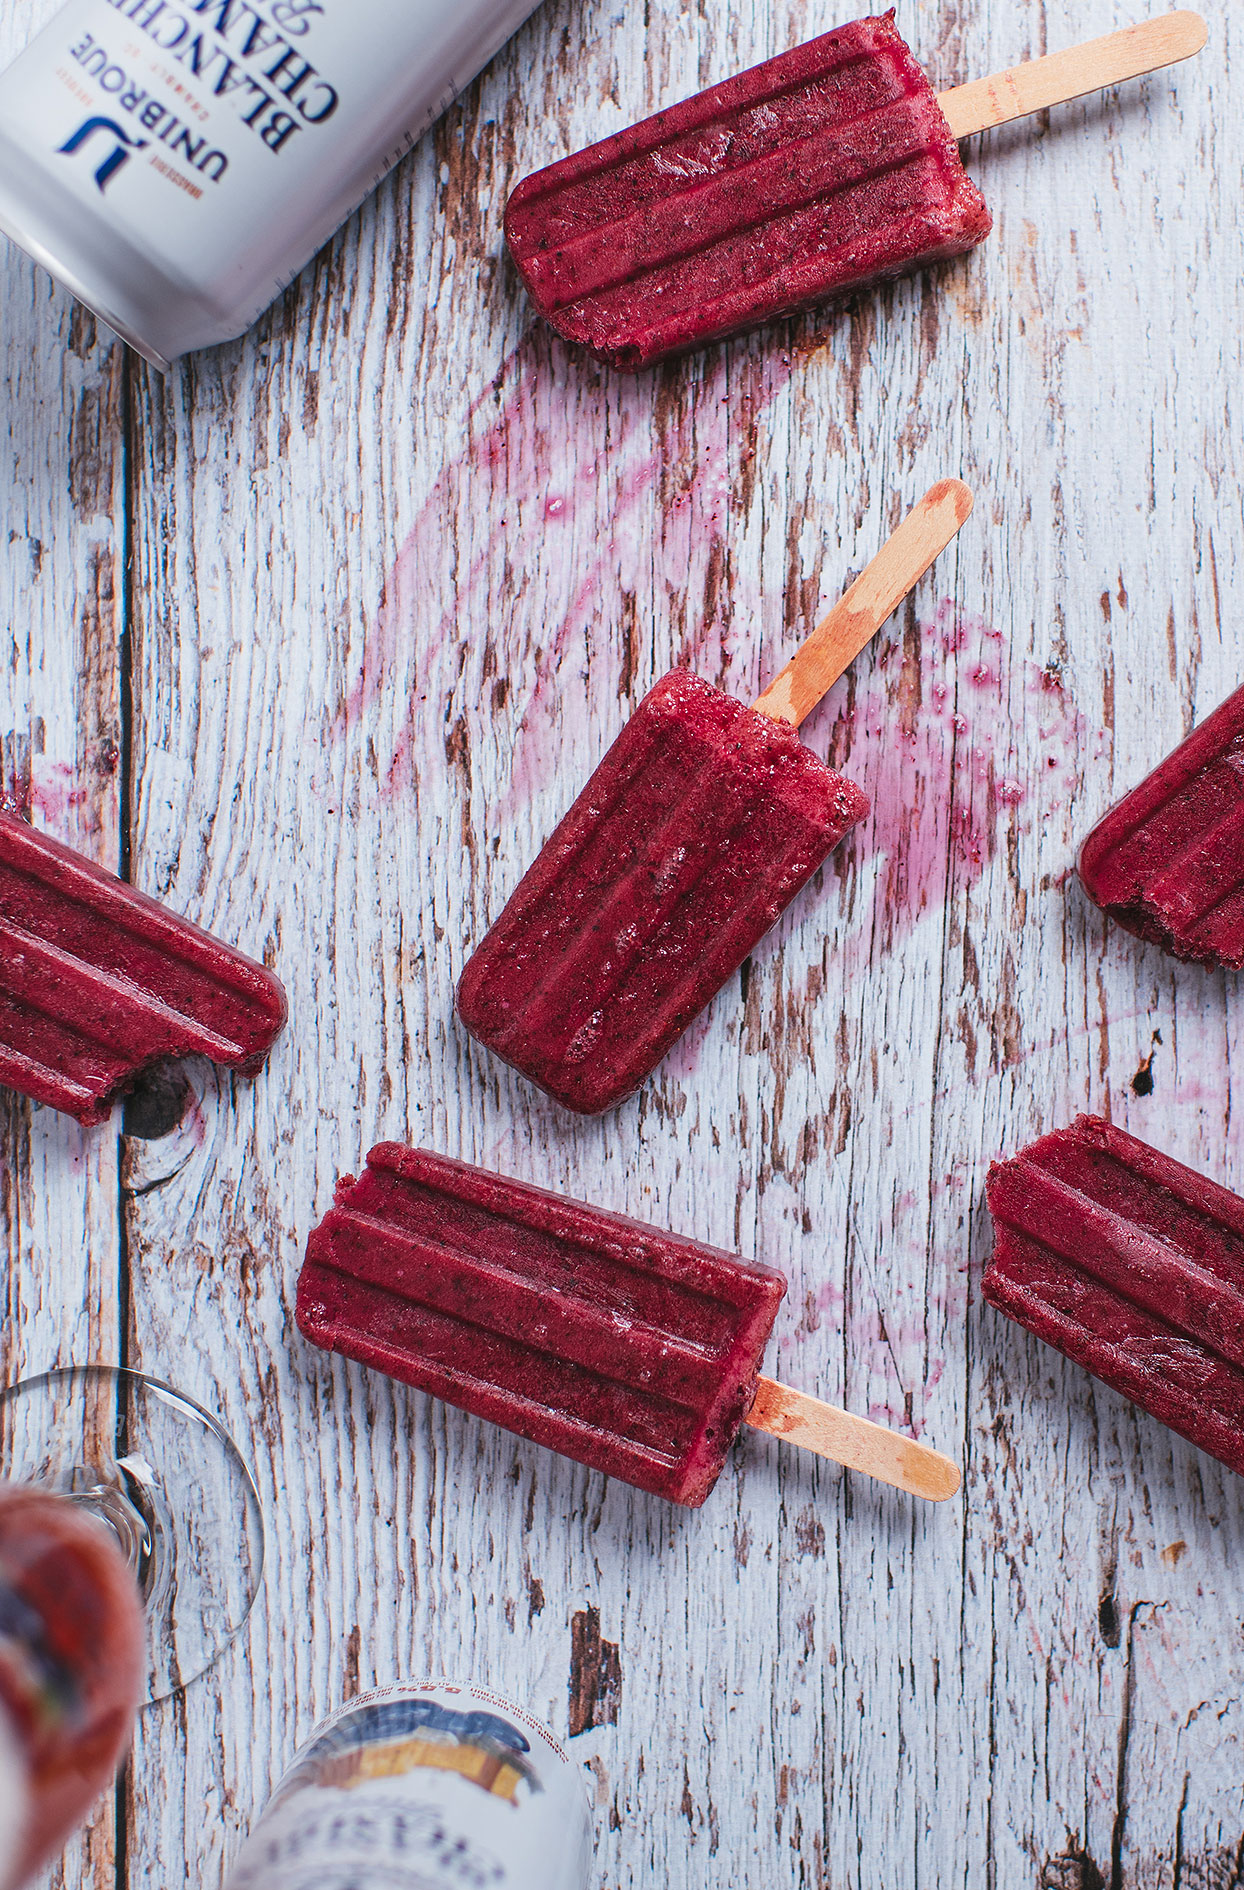 Blueberry beer popsicles